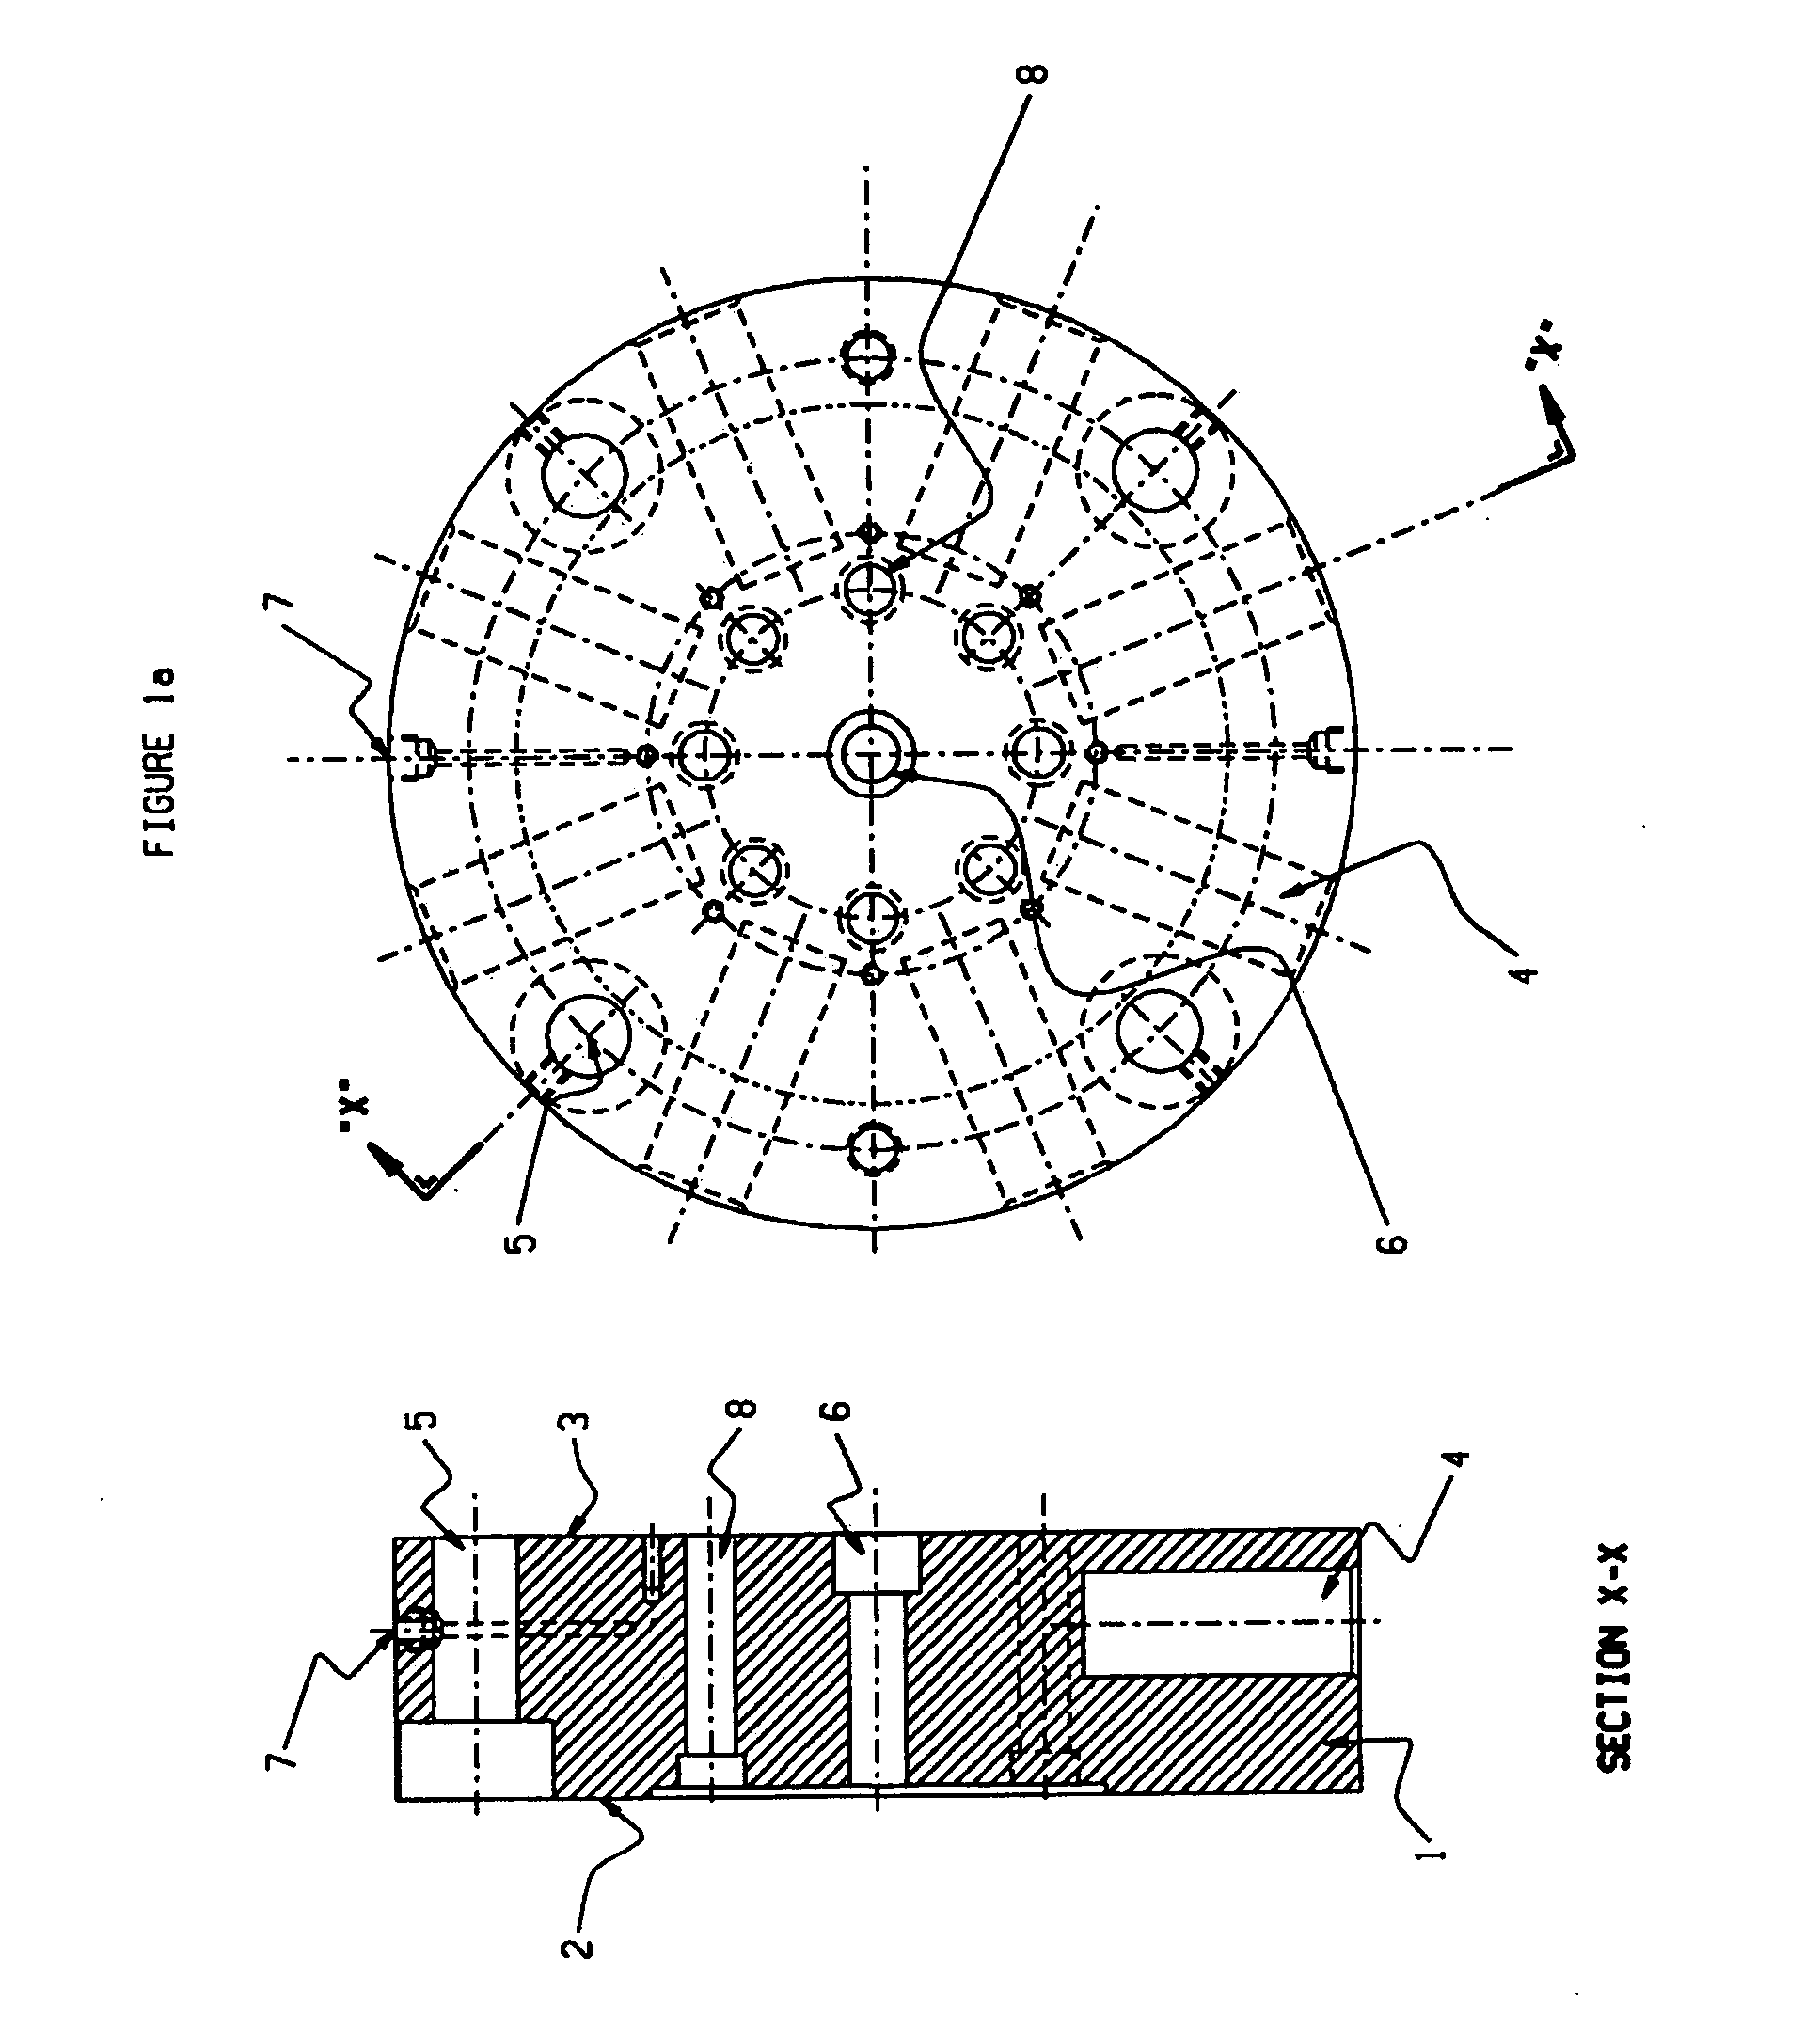 Polymer underwater pelletizer apparatus and process incorporating same